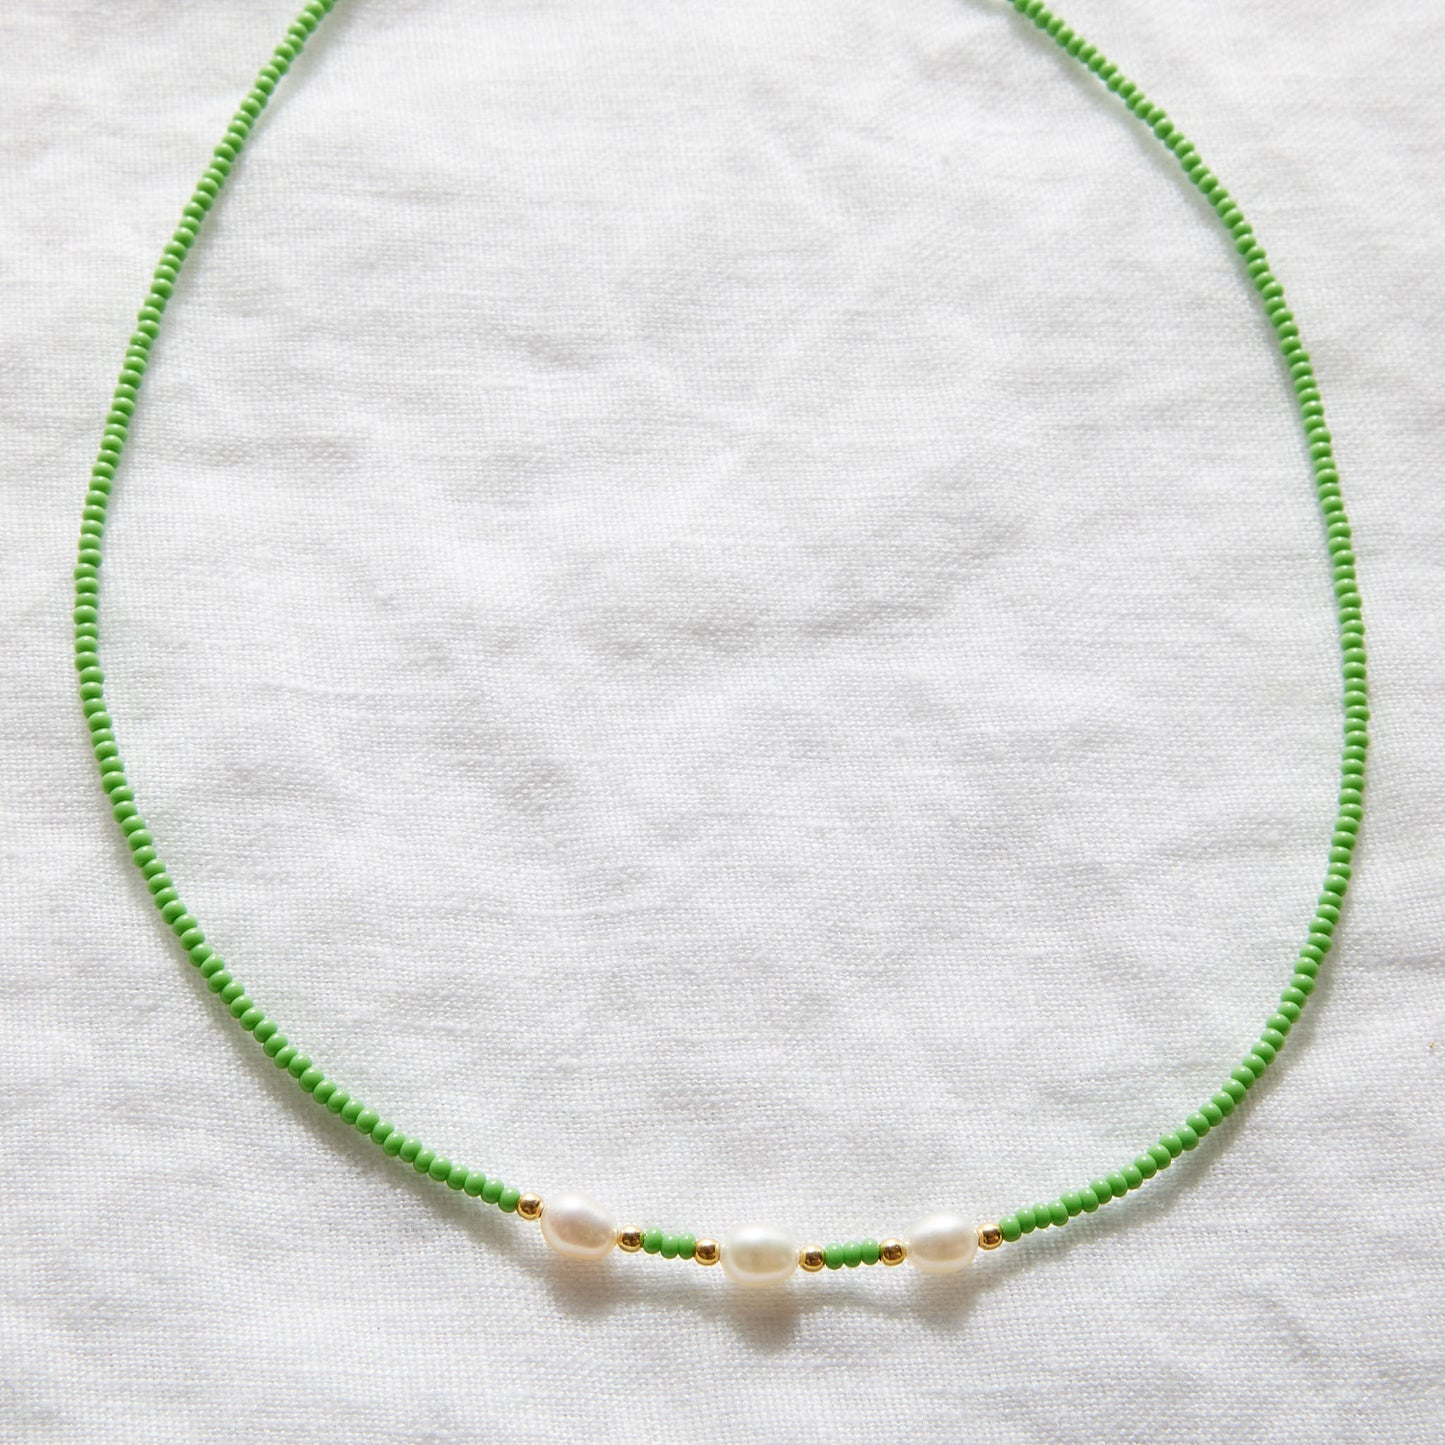 Mint green bead necklace with Freshwater pearls